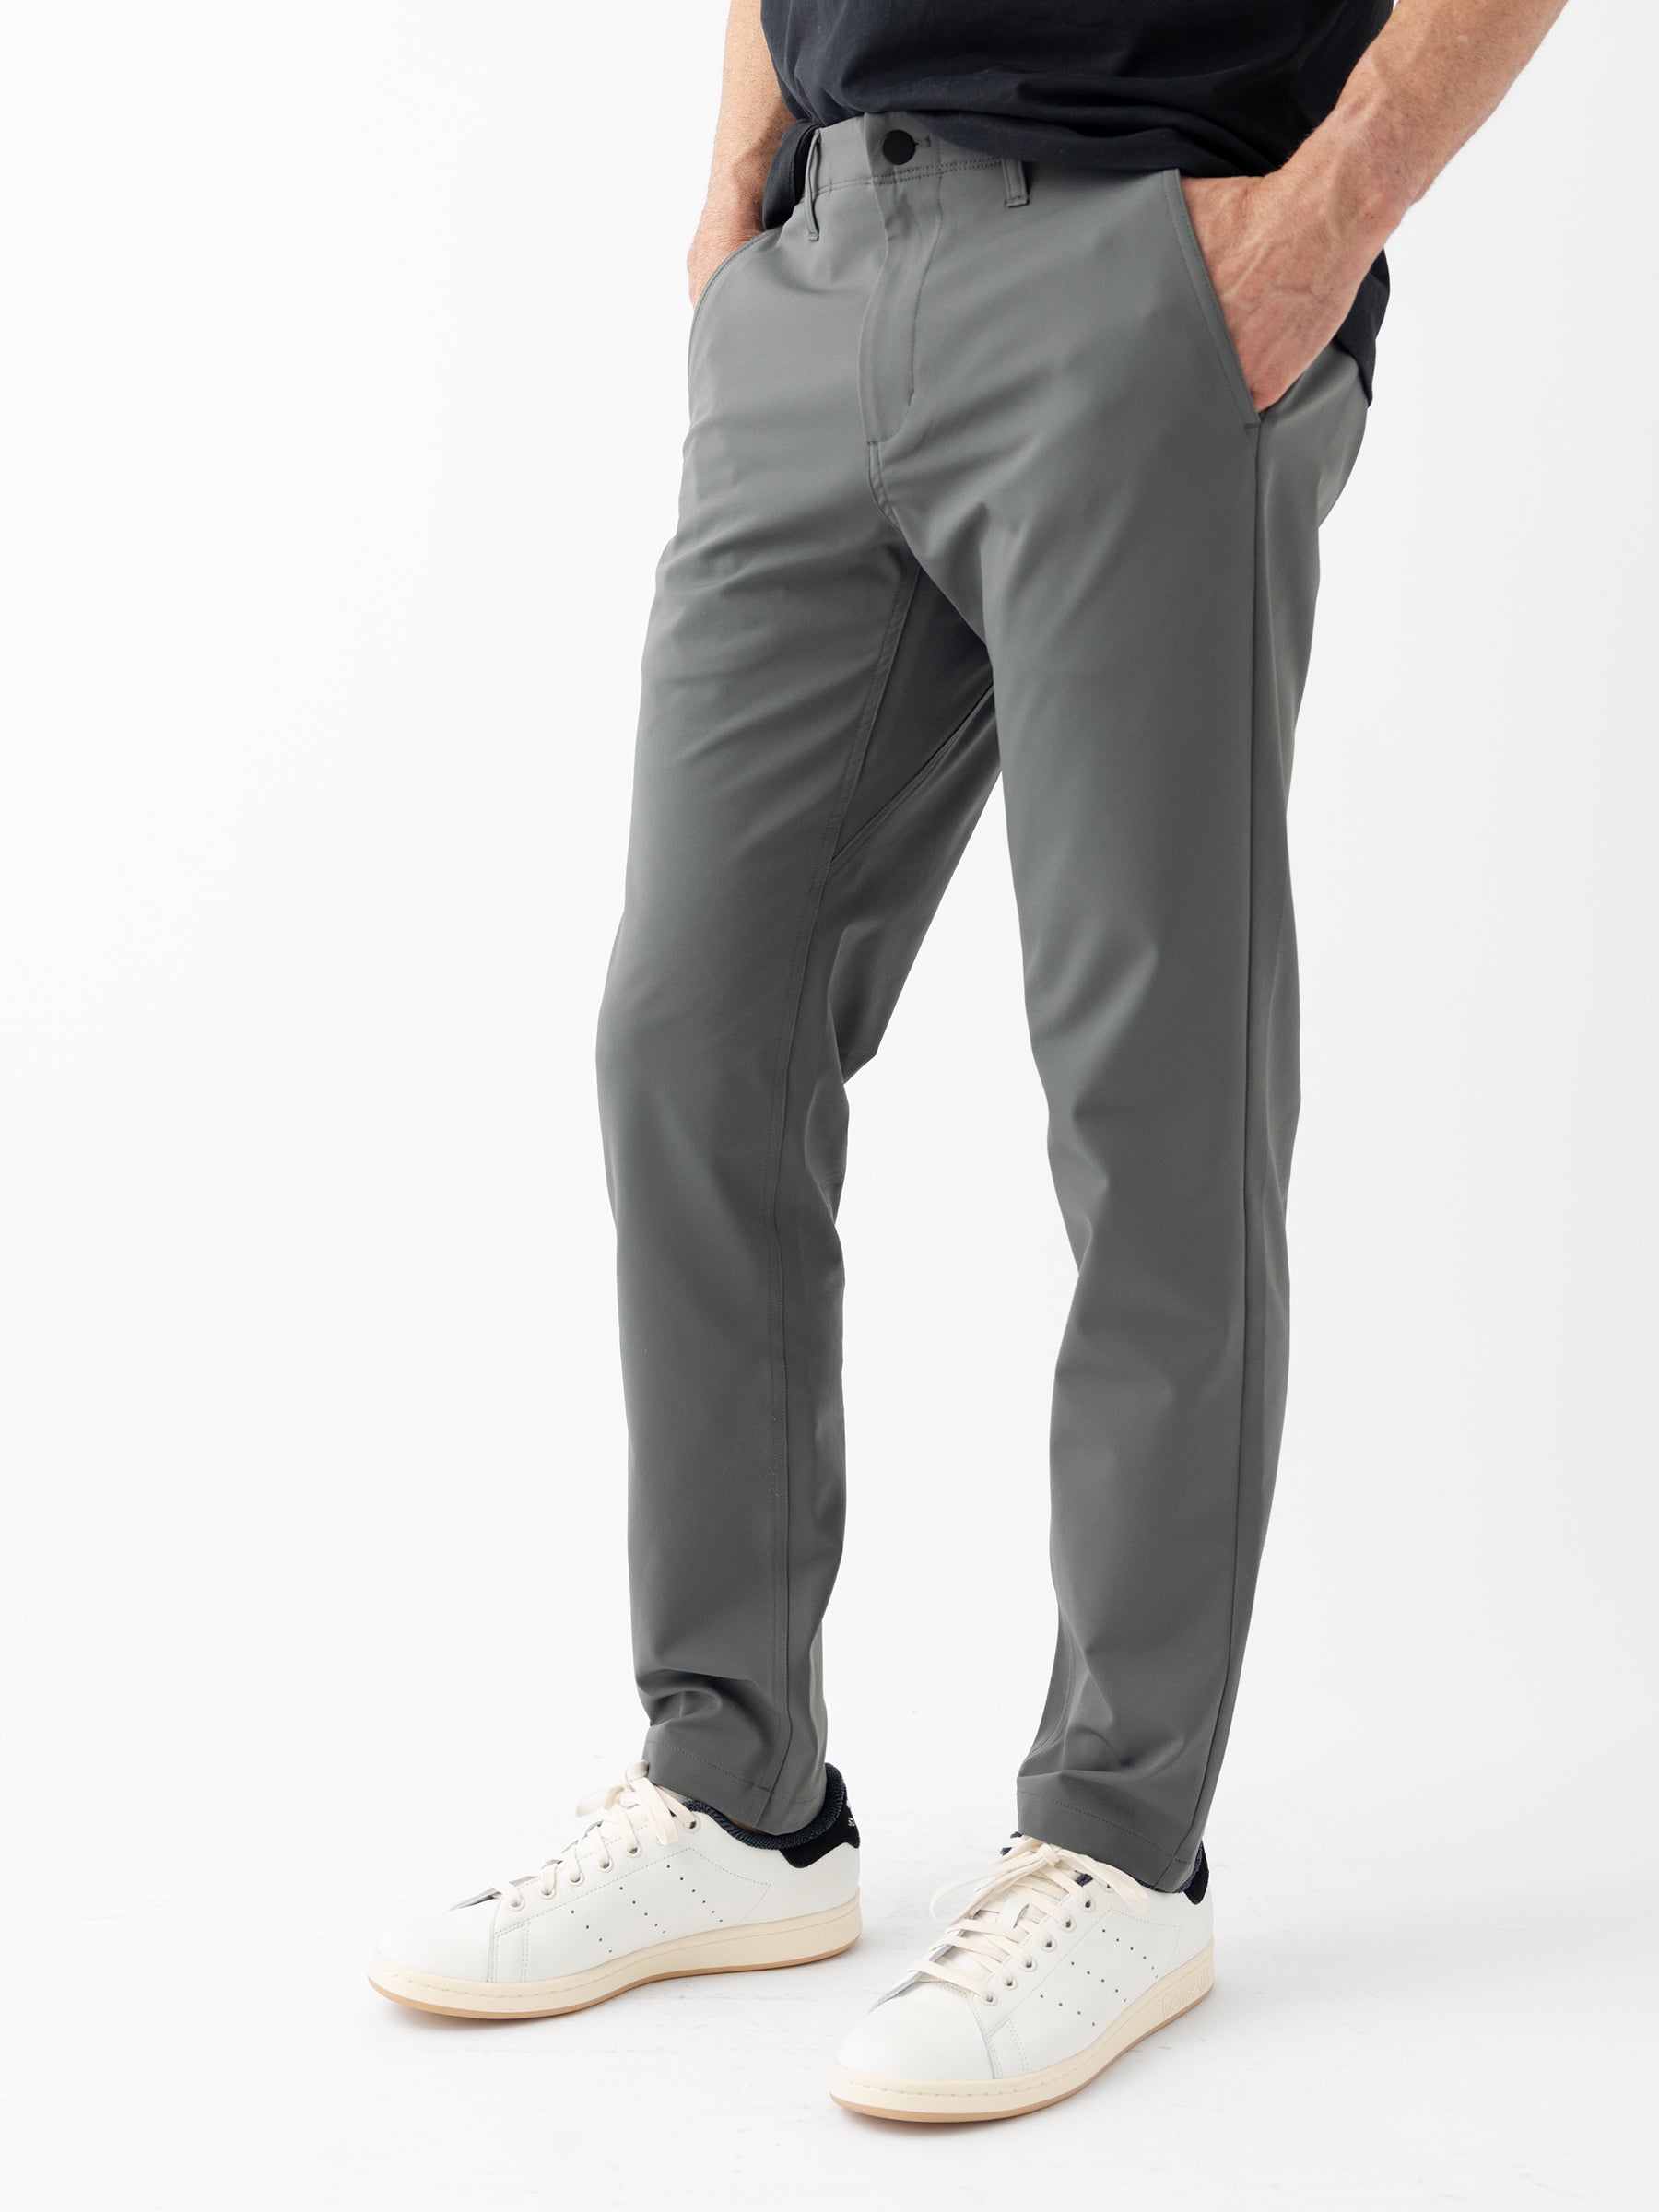 A person stands with hands in pockets, wearing Men's Everywhere Pant 30L from Cozy Earth and white sneakers with black accents. The photo is cropped at the torso and focuses on the pants and shoes, set against a plain white background. |Color:Coal